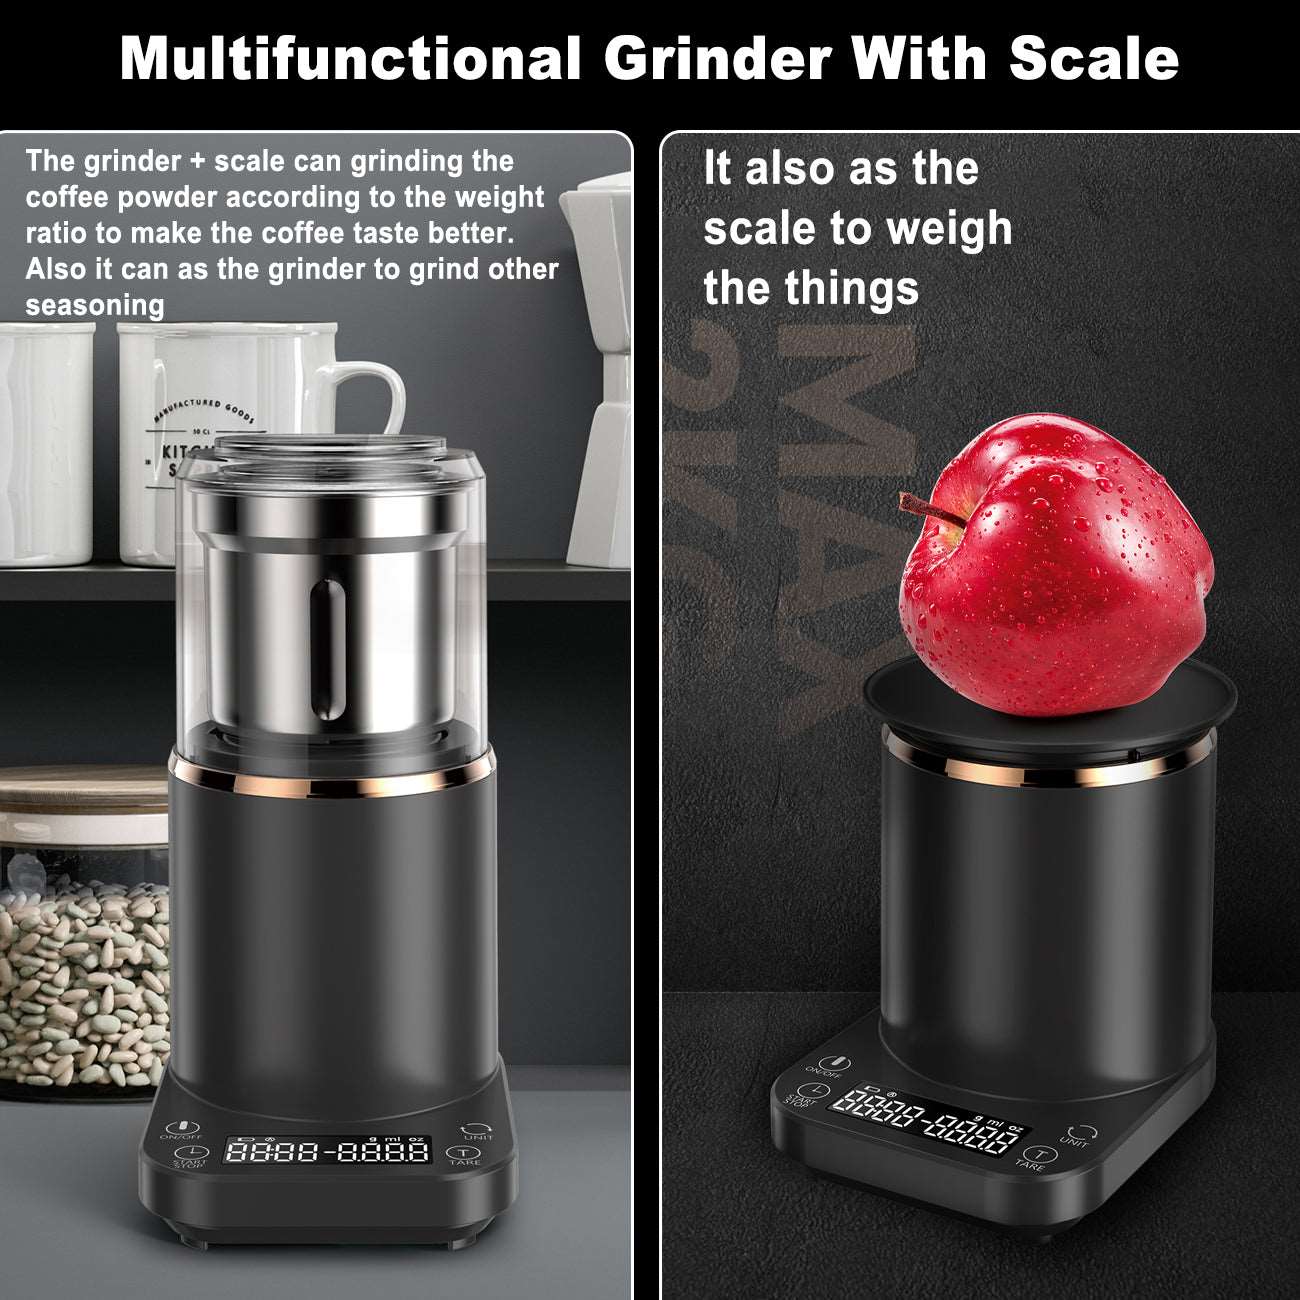 Clivia 200W Commercial Coffee Grinder with Scale, Multifunctional Grinding and Mixing, Portable and Easy to Use，220V 21000RPM